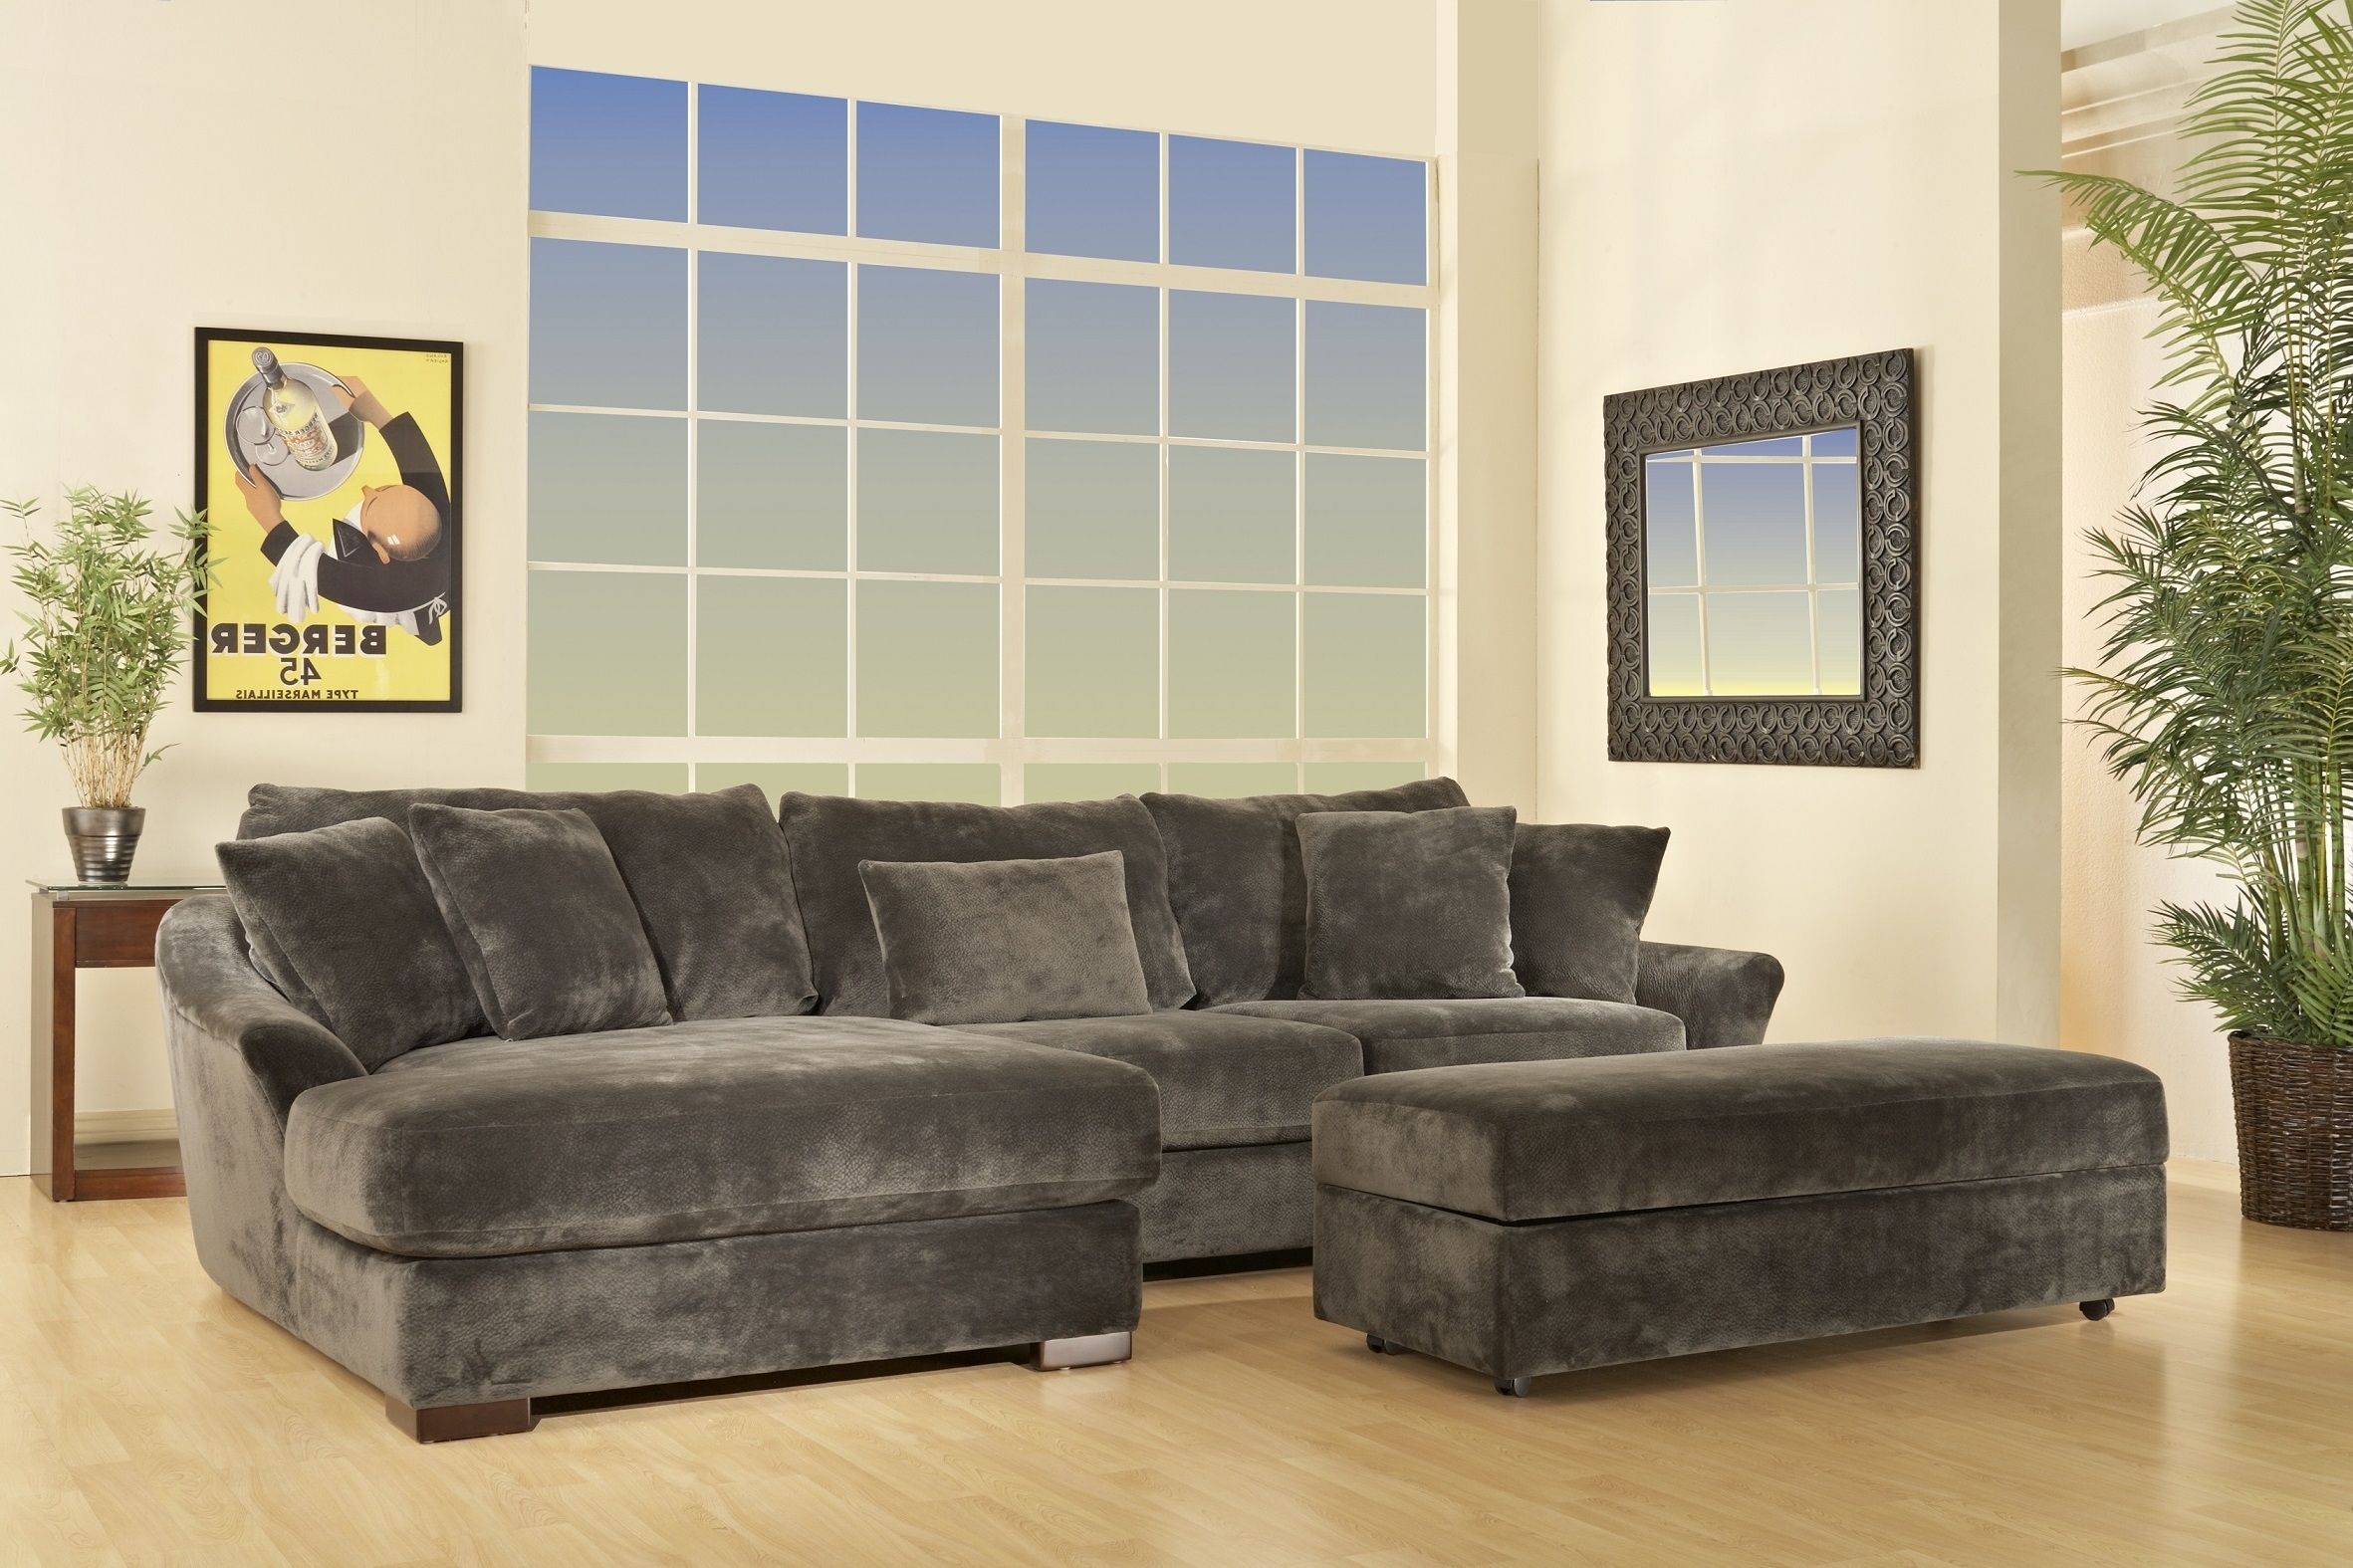 Atlanta Sofa Sectional With Left Arm Chaisefairmont Designs For Sectional Sofas In Atlanta (Photo 3 of 10)